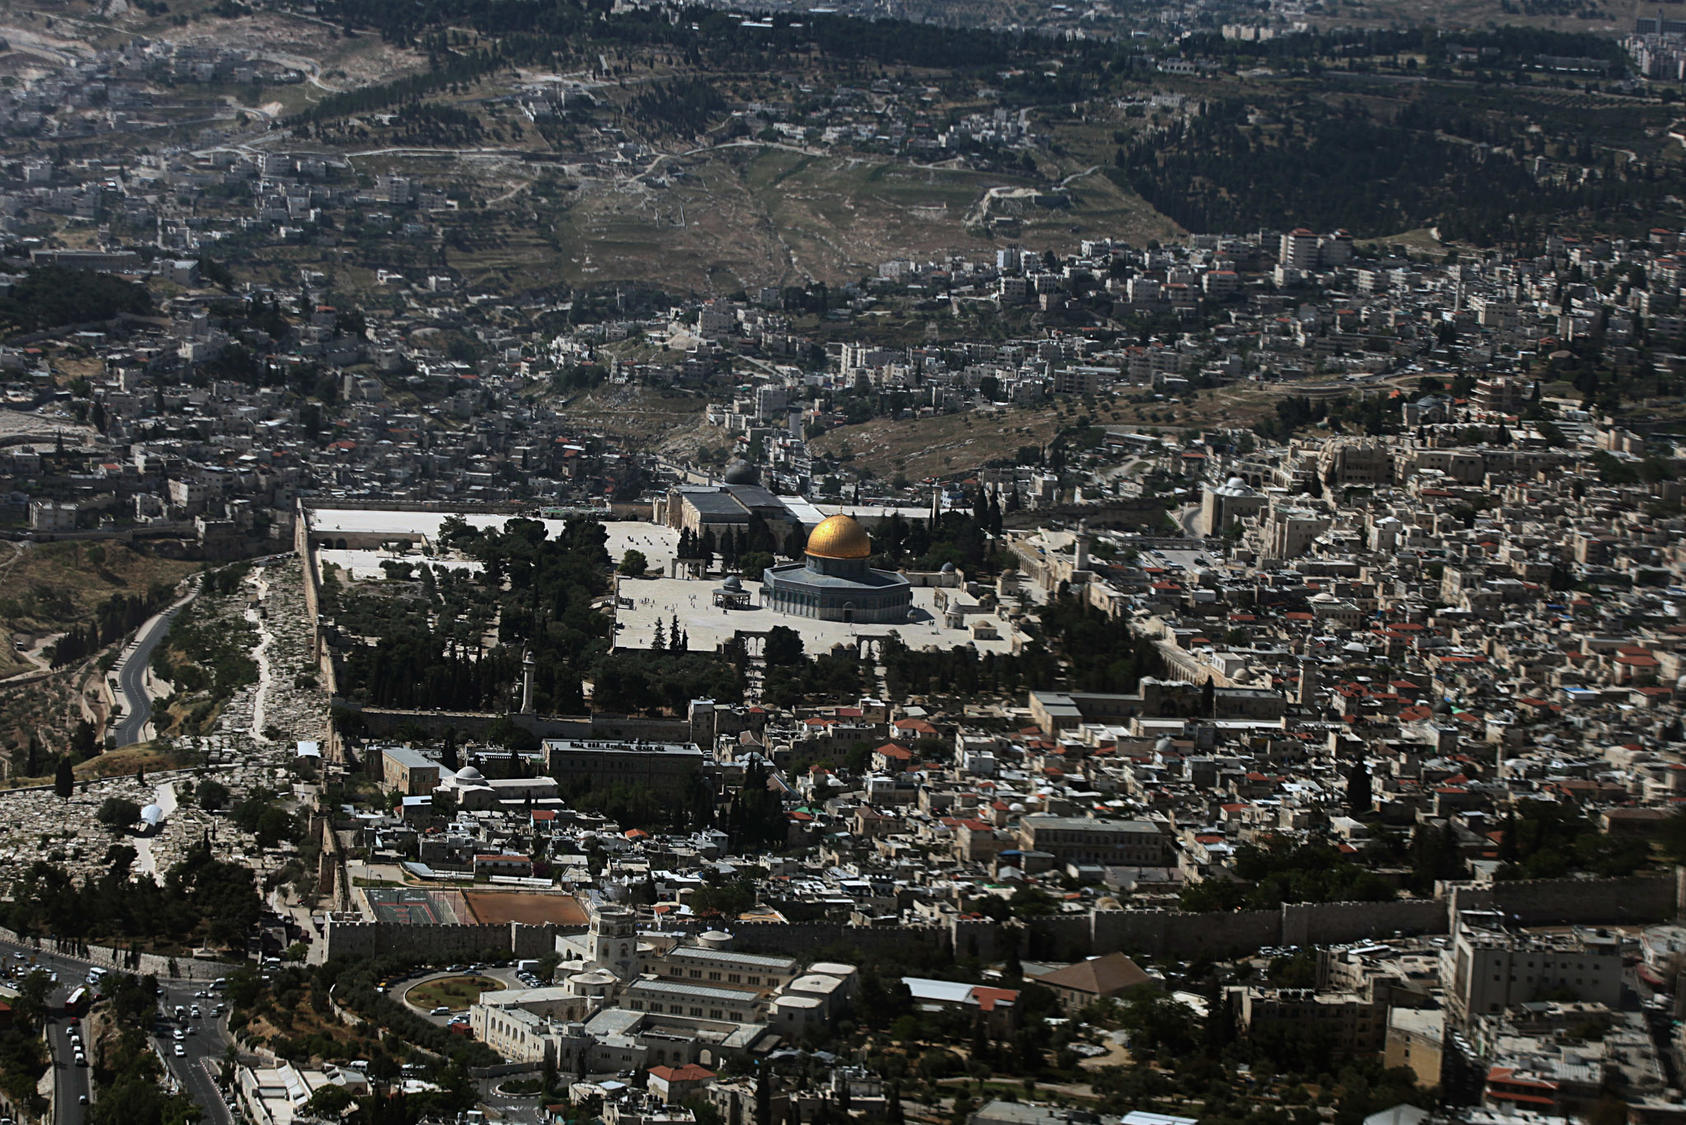 An aerial view of the Old City of Jerusalem, with the Al-Aqsa Mosque at the cente